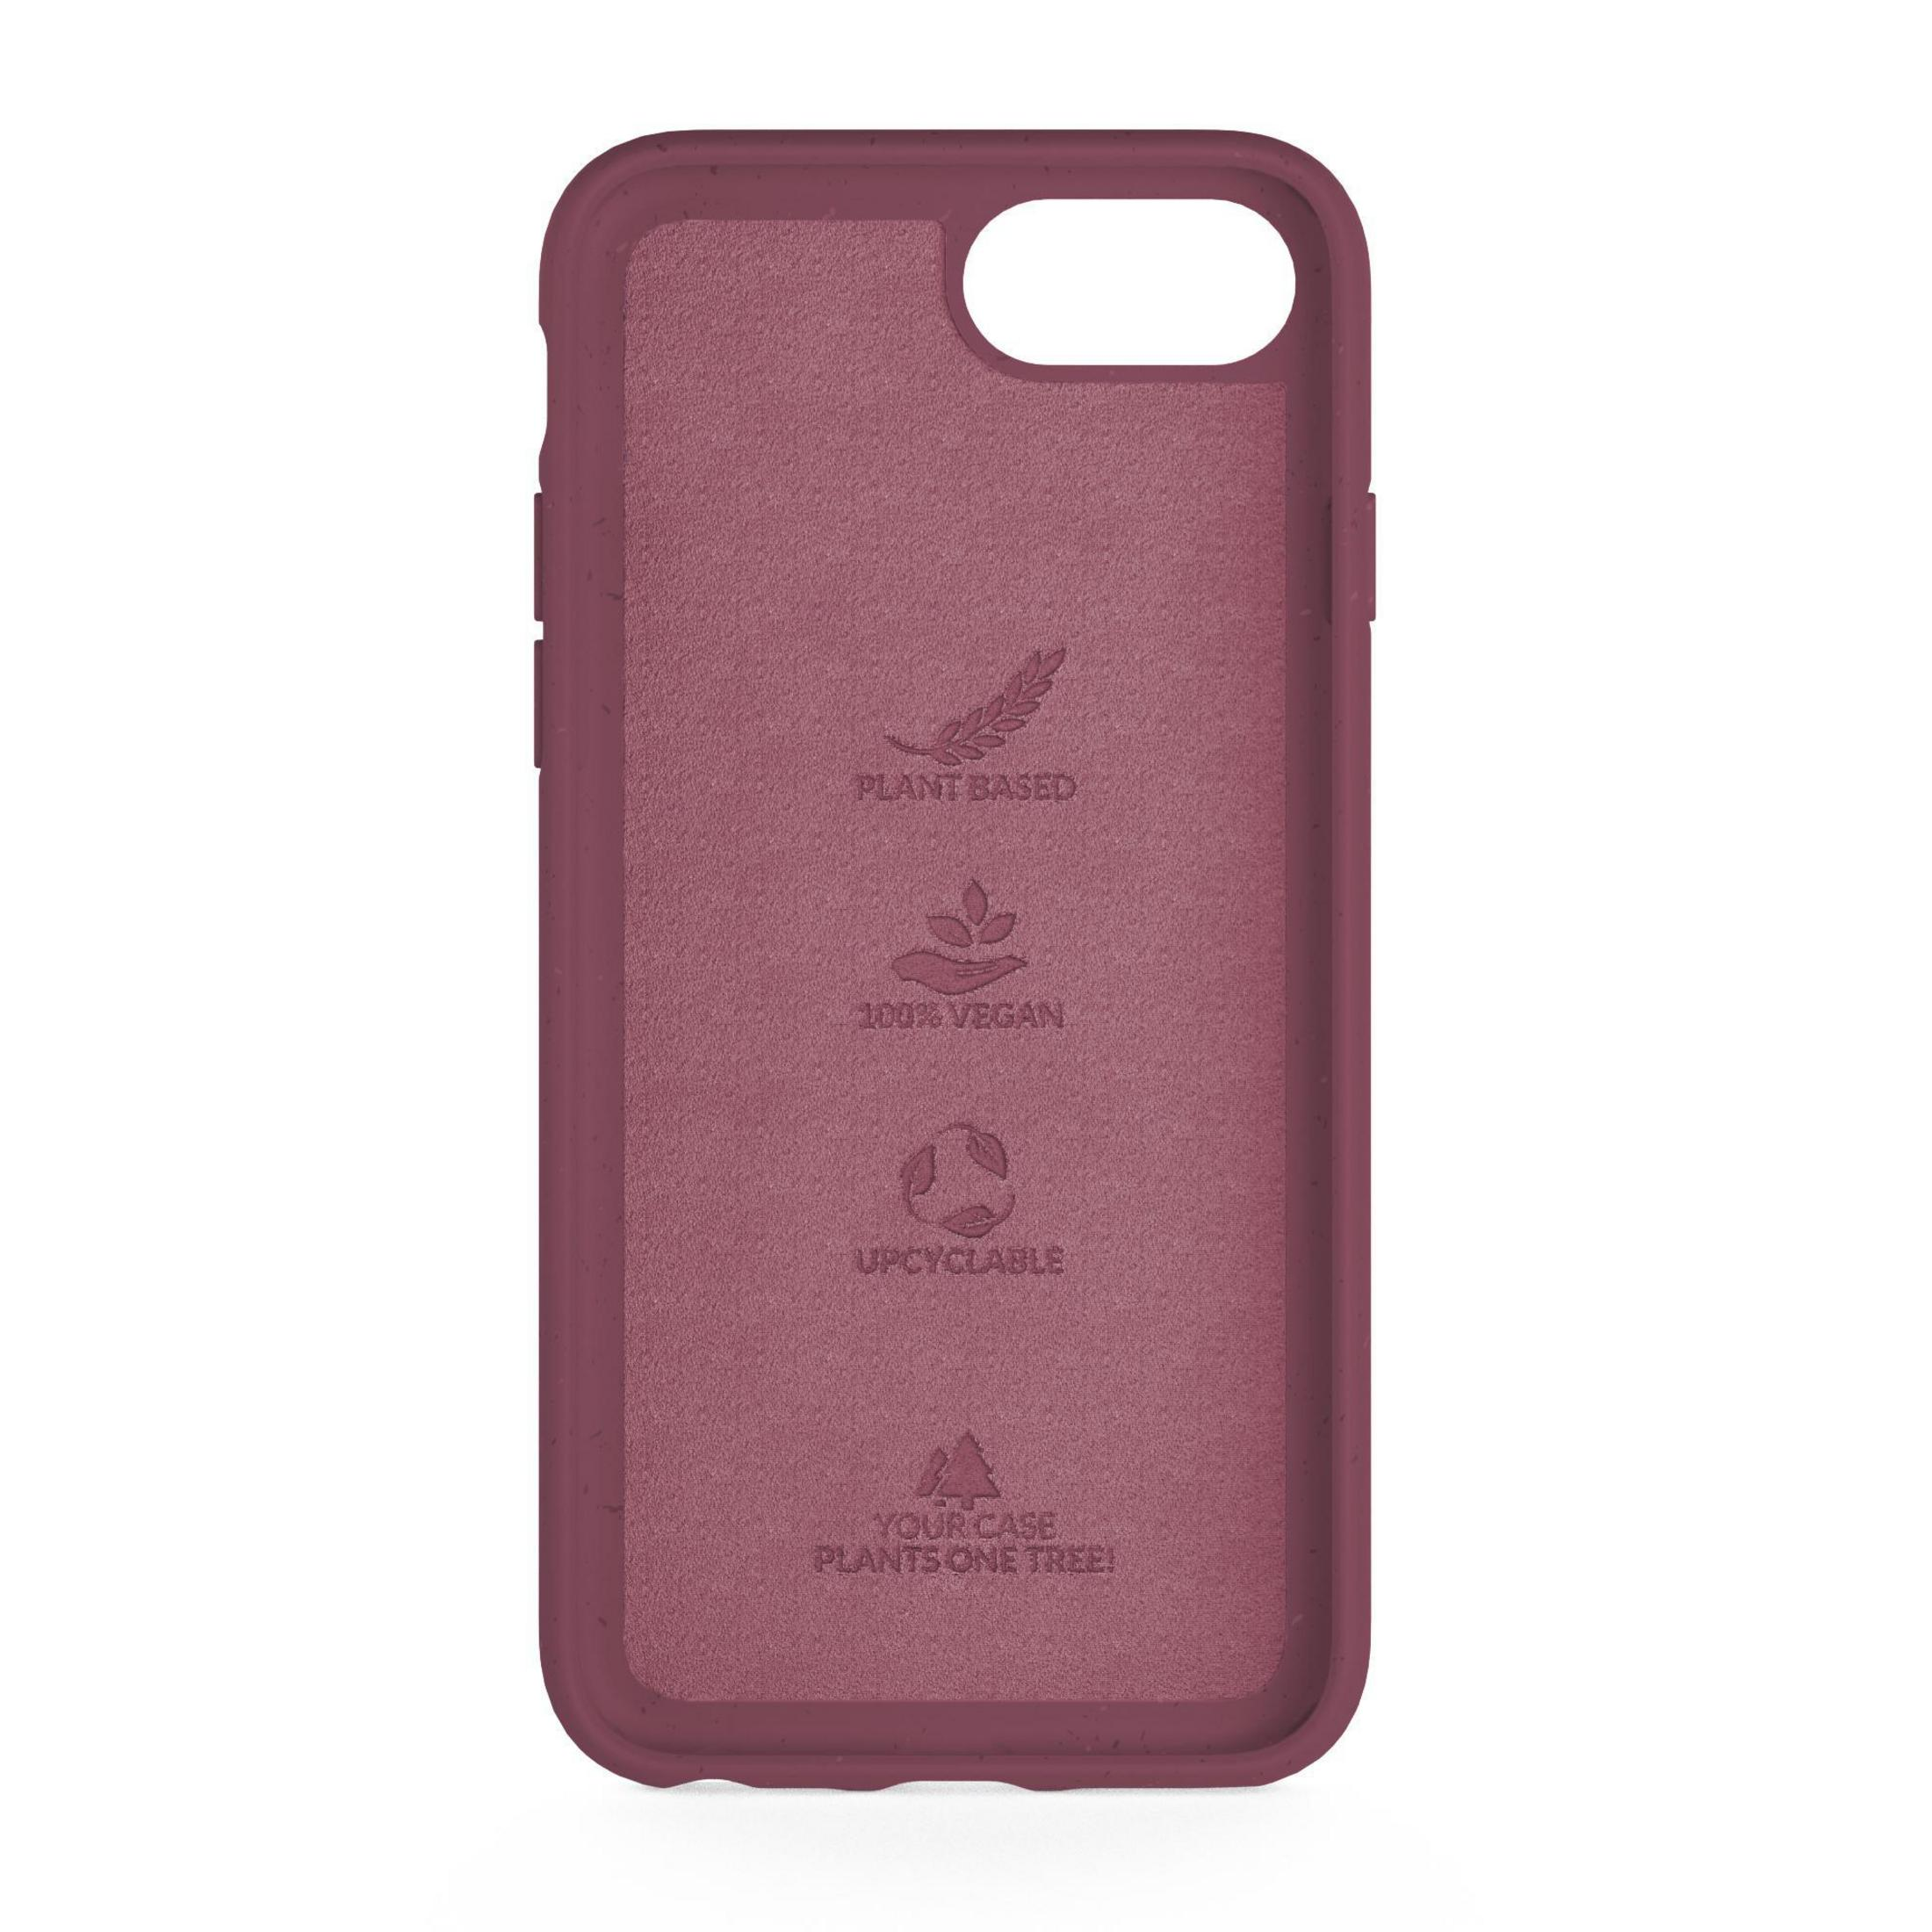 WOODCESSORIES ECO488 BIO CASE CLASSIC iPhone iPhone 2020, 6, RED, SE Rot SE2 iPhone Apple, 8, 7 Backcover, 6 iPhone IP 8 7